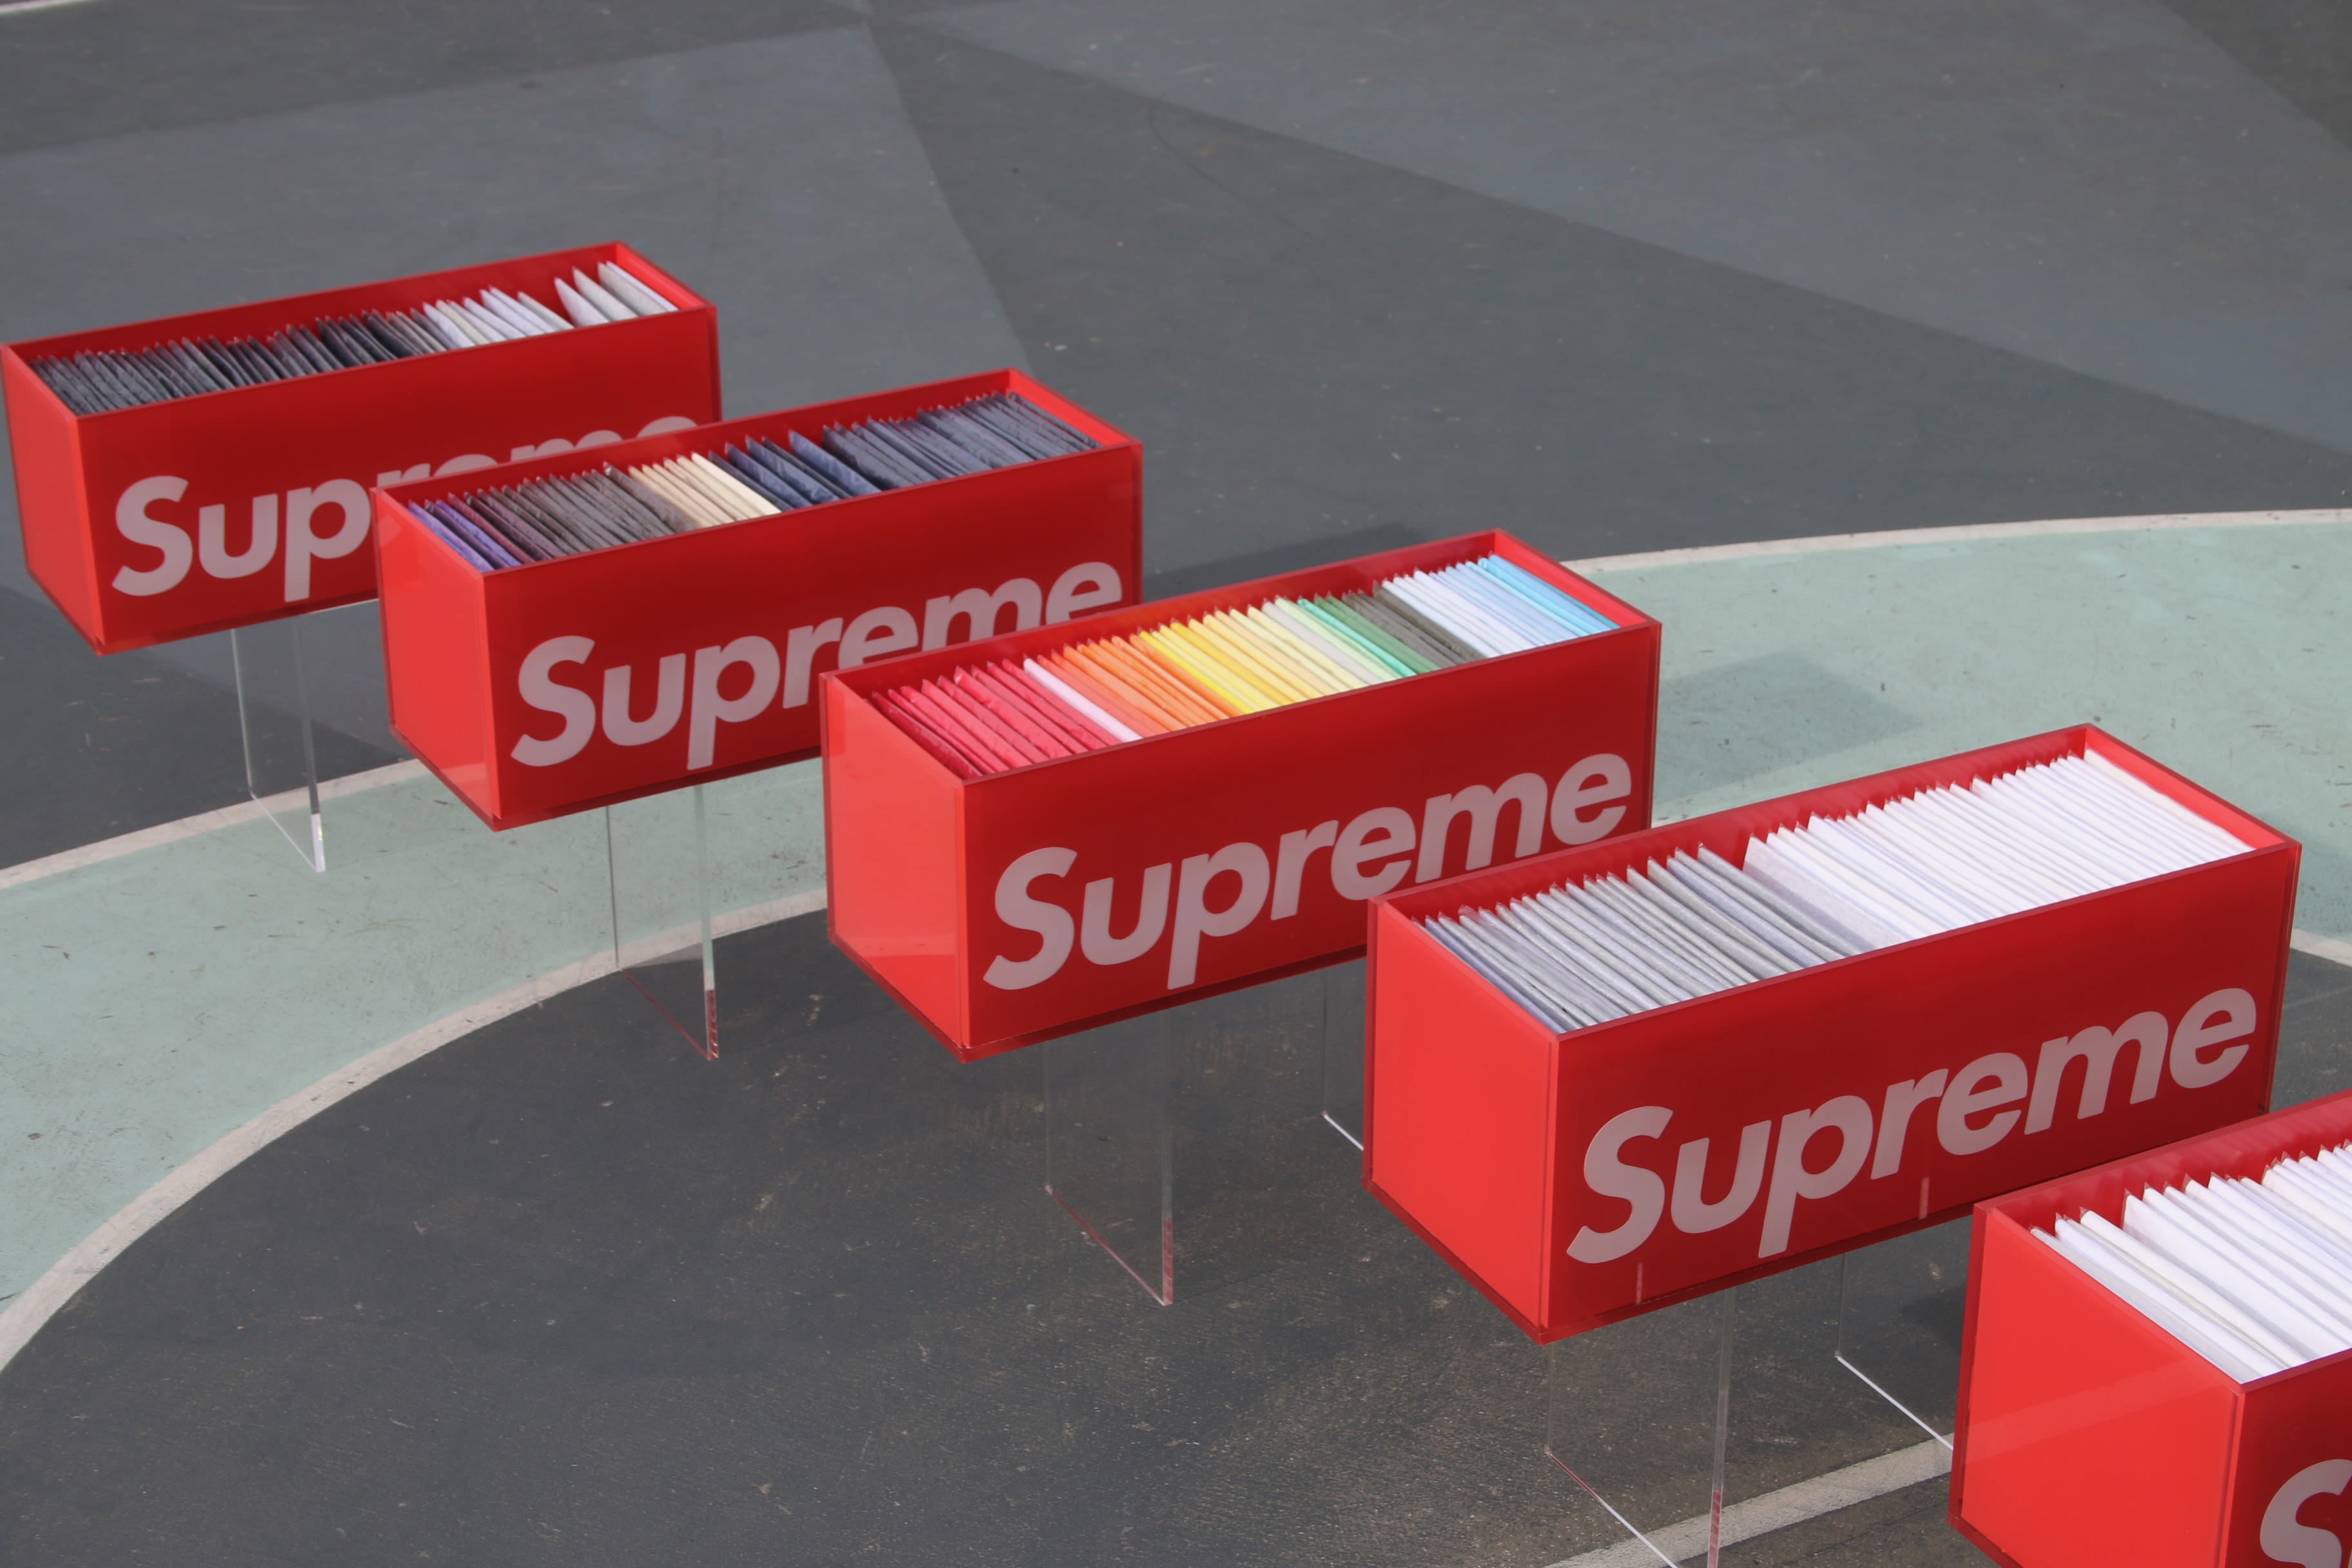 Battle of Supremes: How 'legal fakes' are challenging a $1B brand